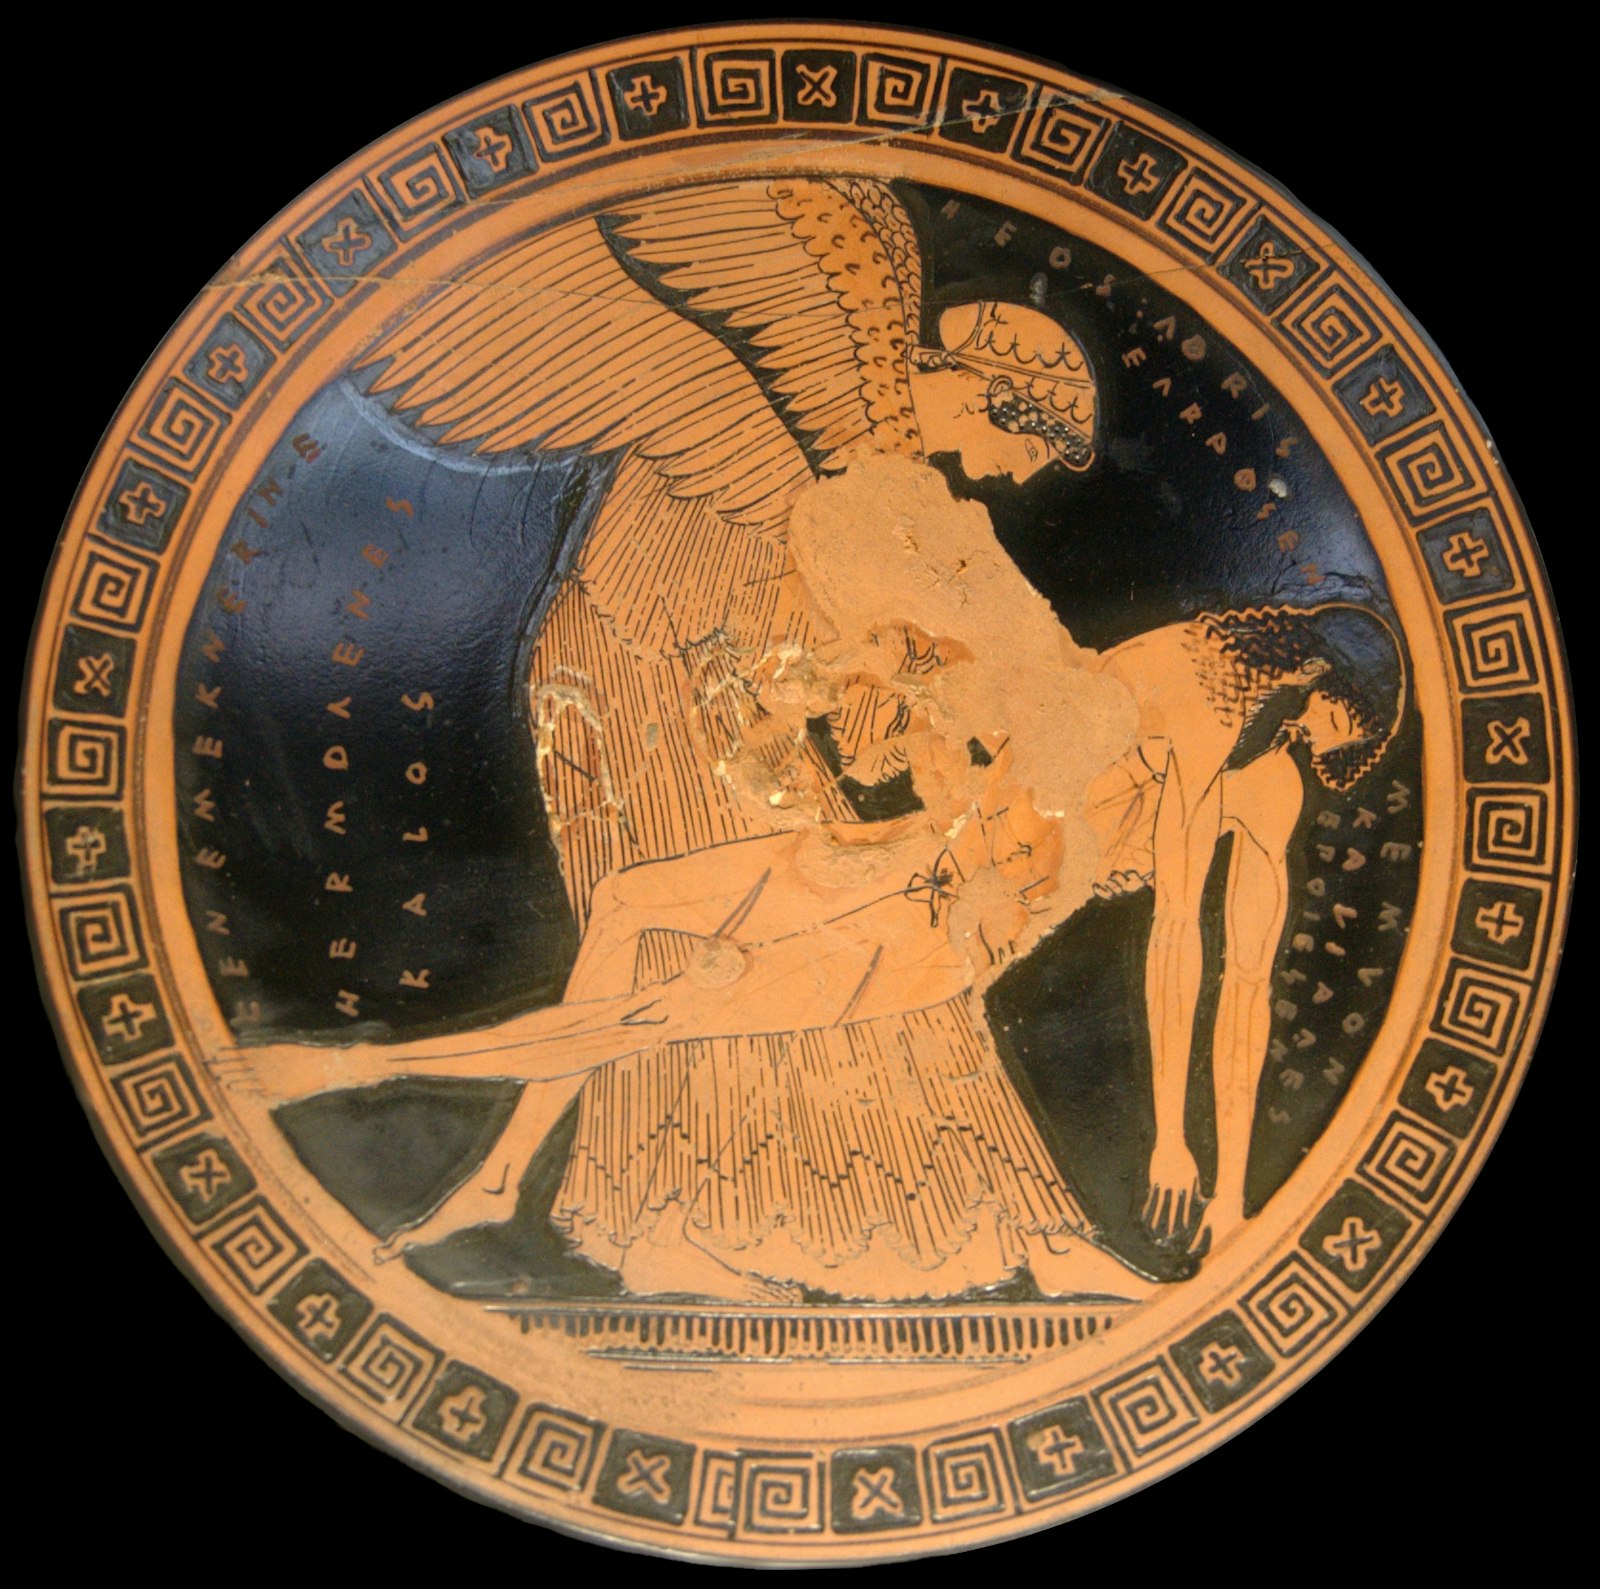 Interior of Attic red-figure cup showing Eos with the body of her dead son Memnon.